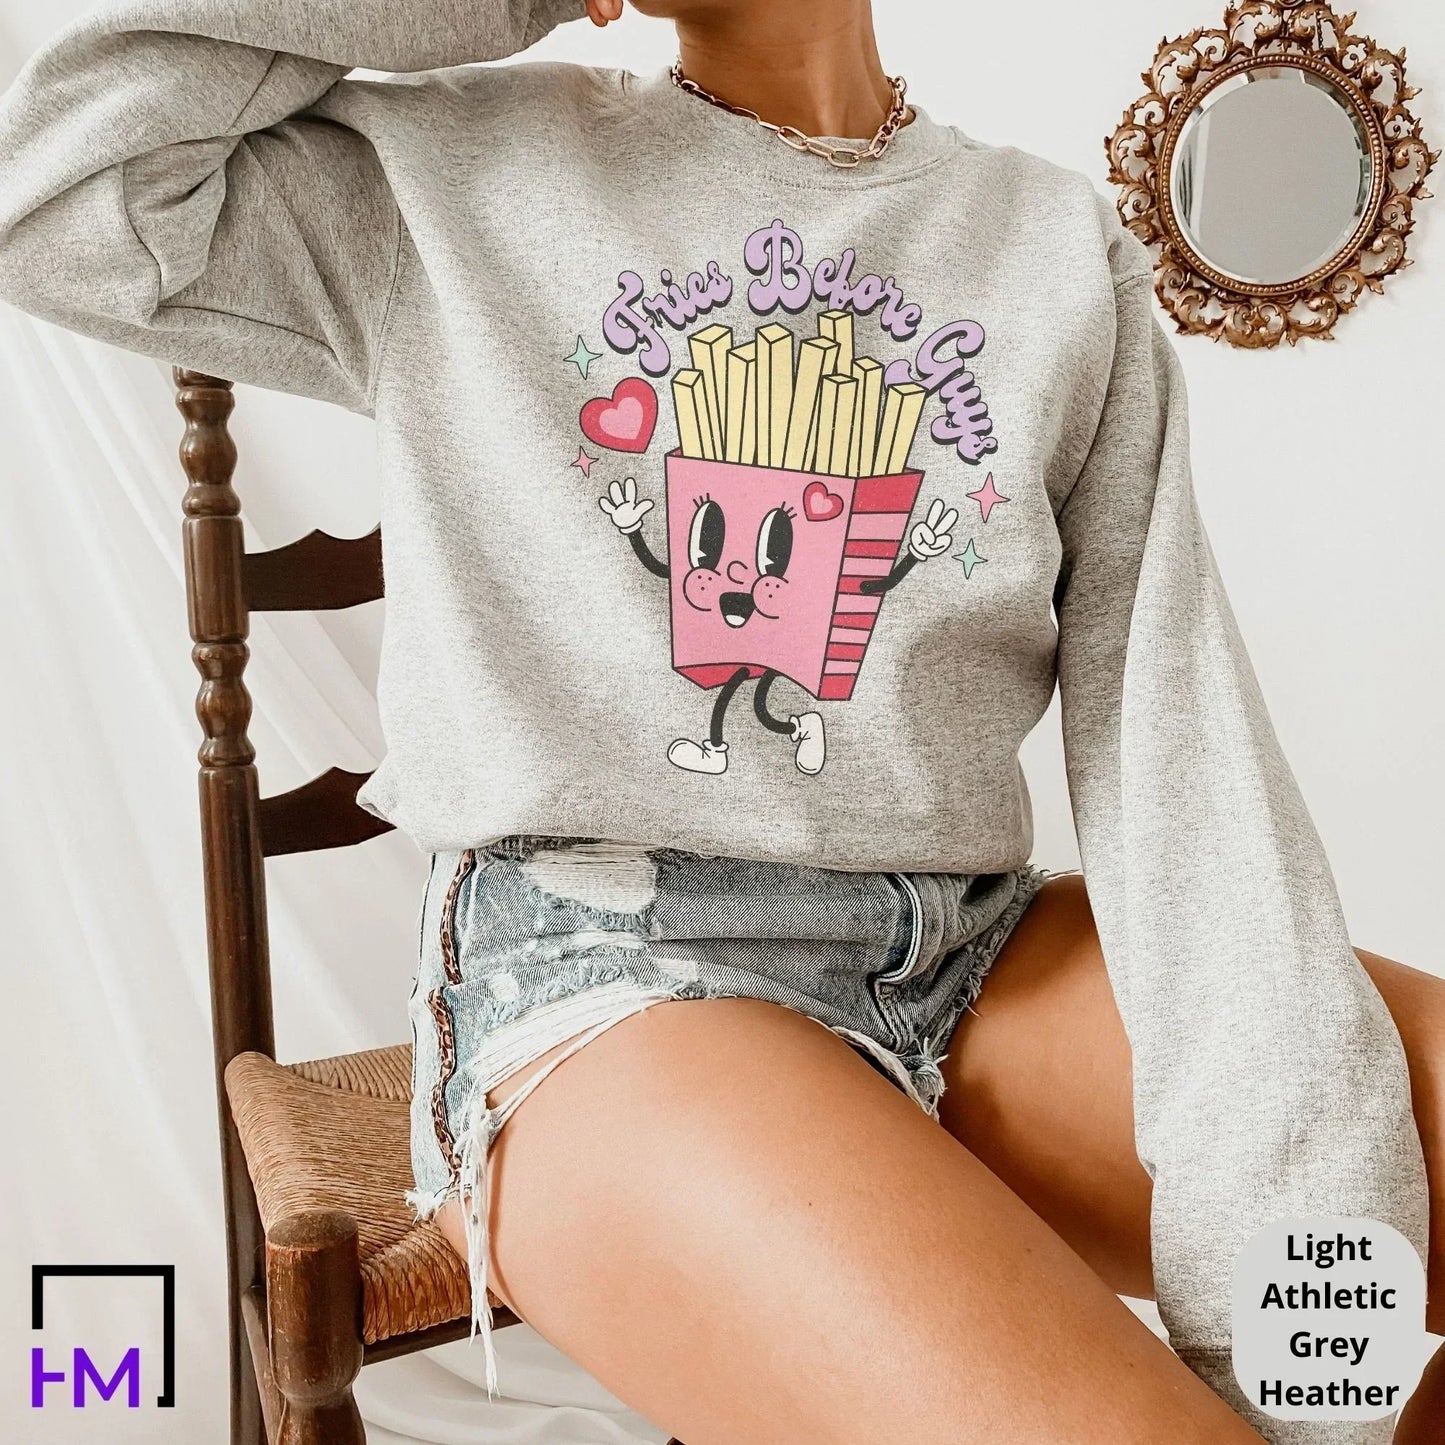 Fries Before Guys, Funny Valentine's Day Shirt, Bestie Valentine's Gift for Her, Love Shirts for Women, Cute V-Day Shirt, Proud to Be Single, Self Love Shirt